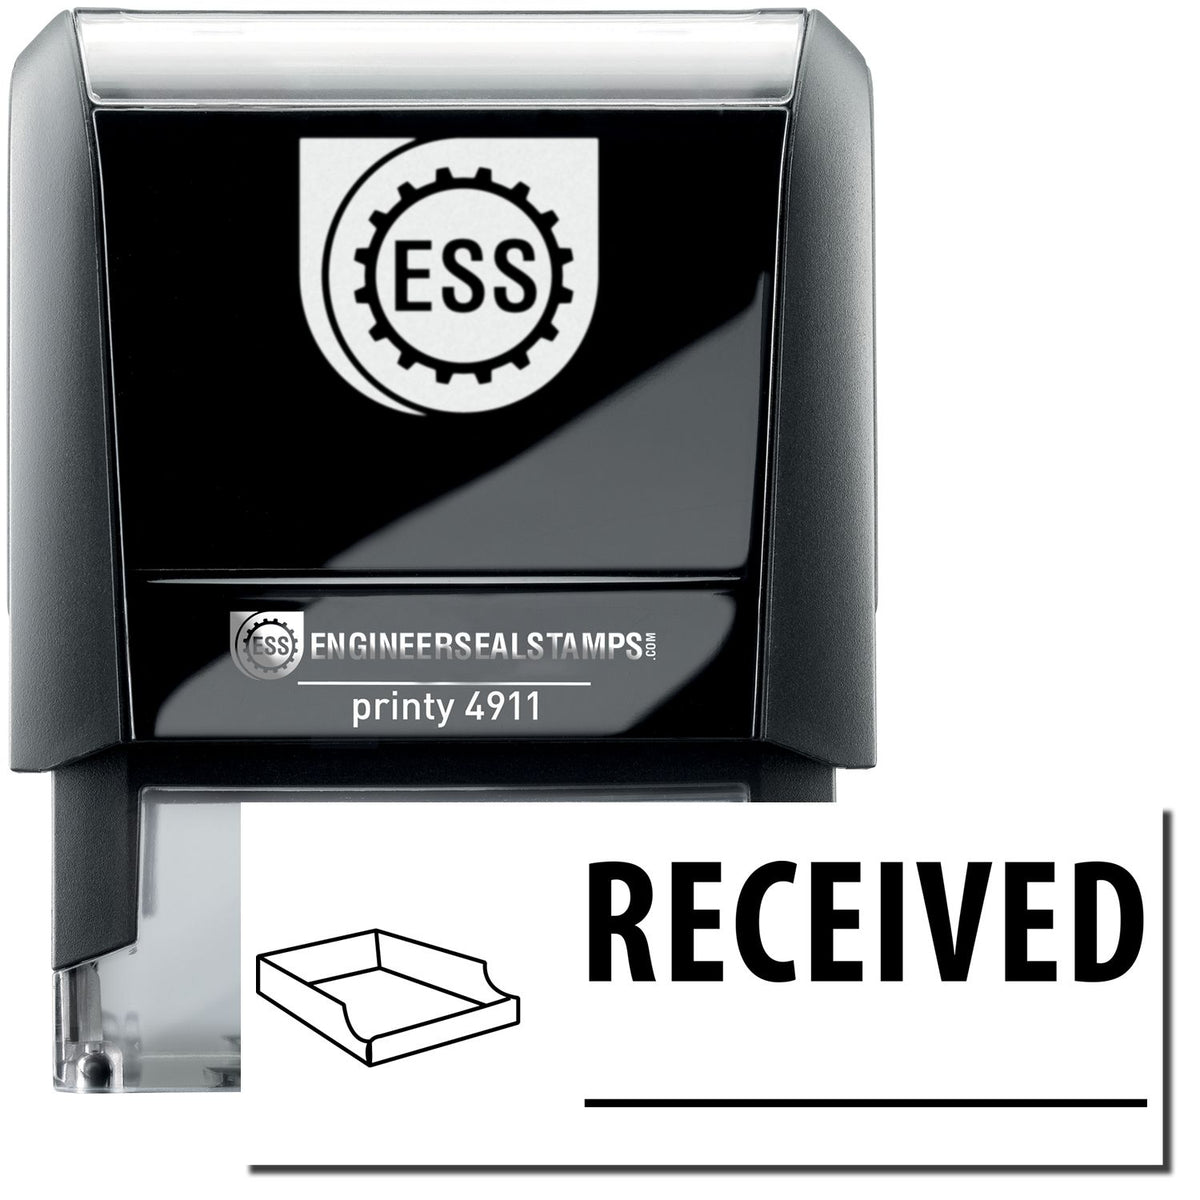 A self-inking stamp with a stamped image showing how the text &quot;RECEIVED&quot; with a line underneath the text and an inbox icon on the left side is displayed after stamping.